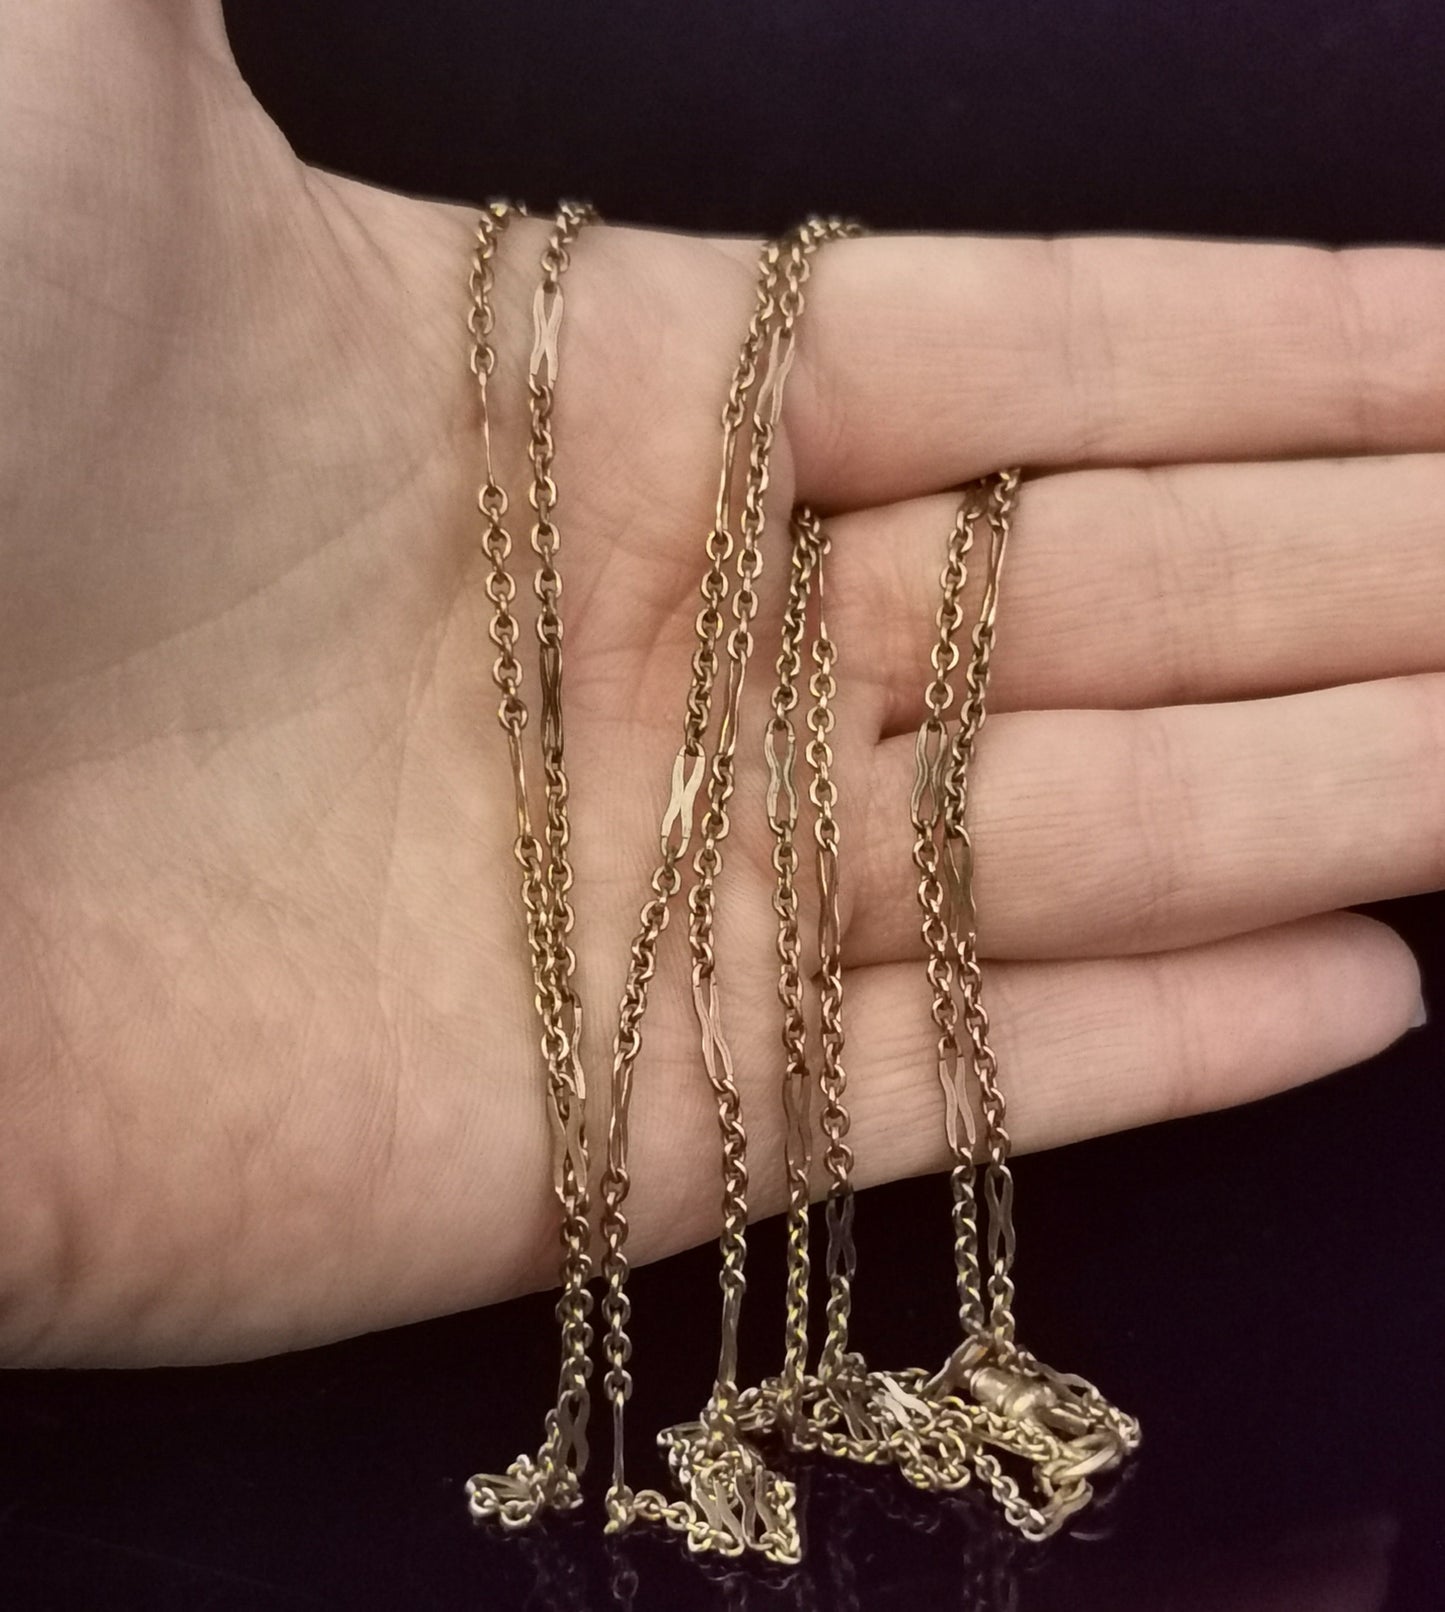 Antique Victorian Rose gold longuard chain, muff chain necklace